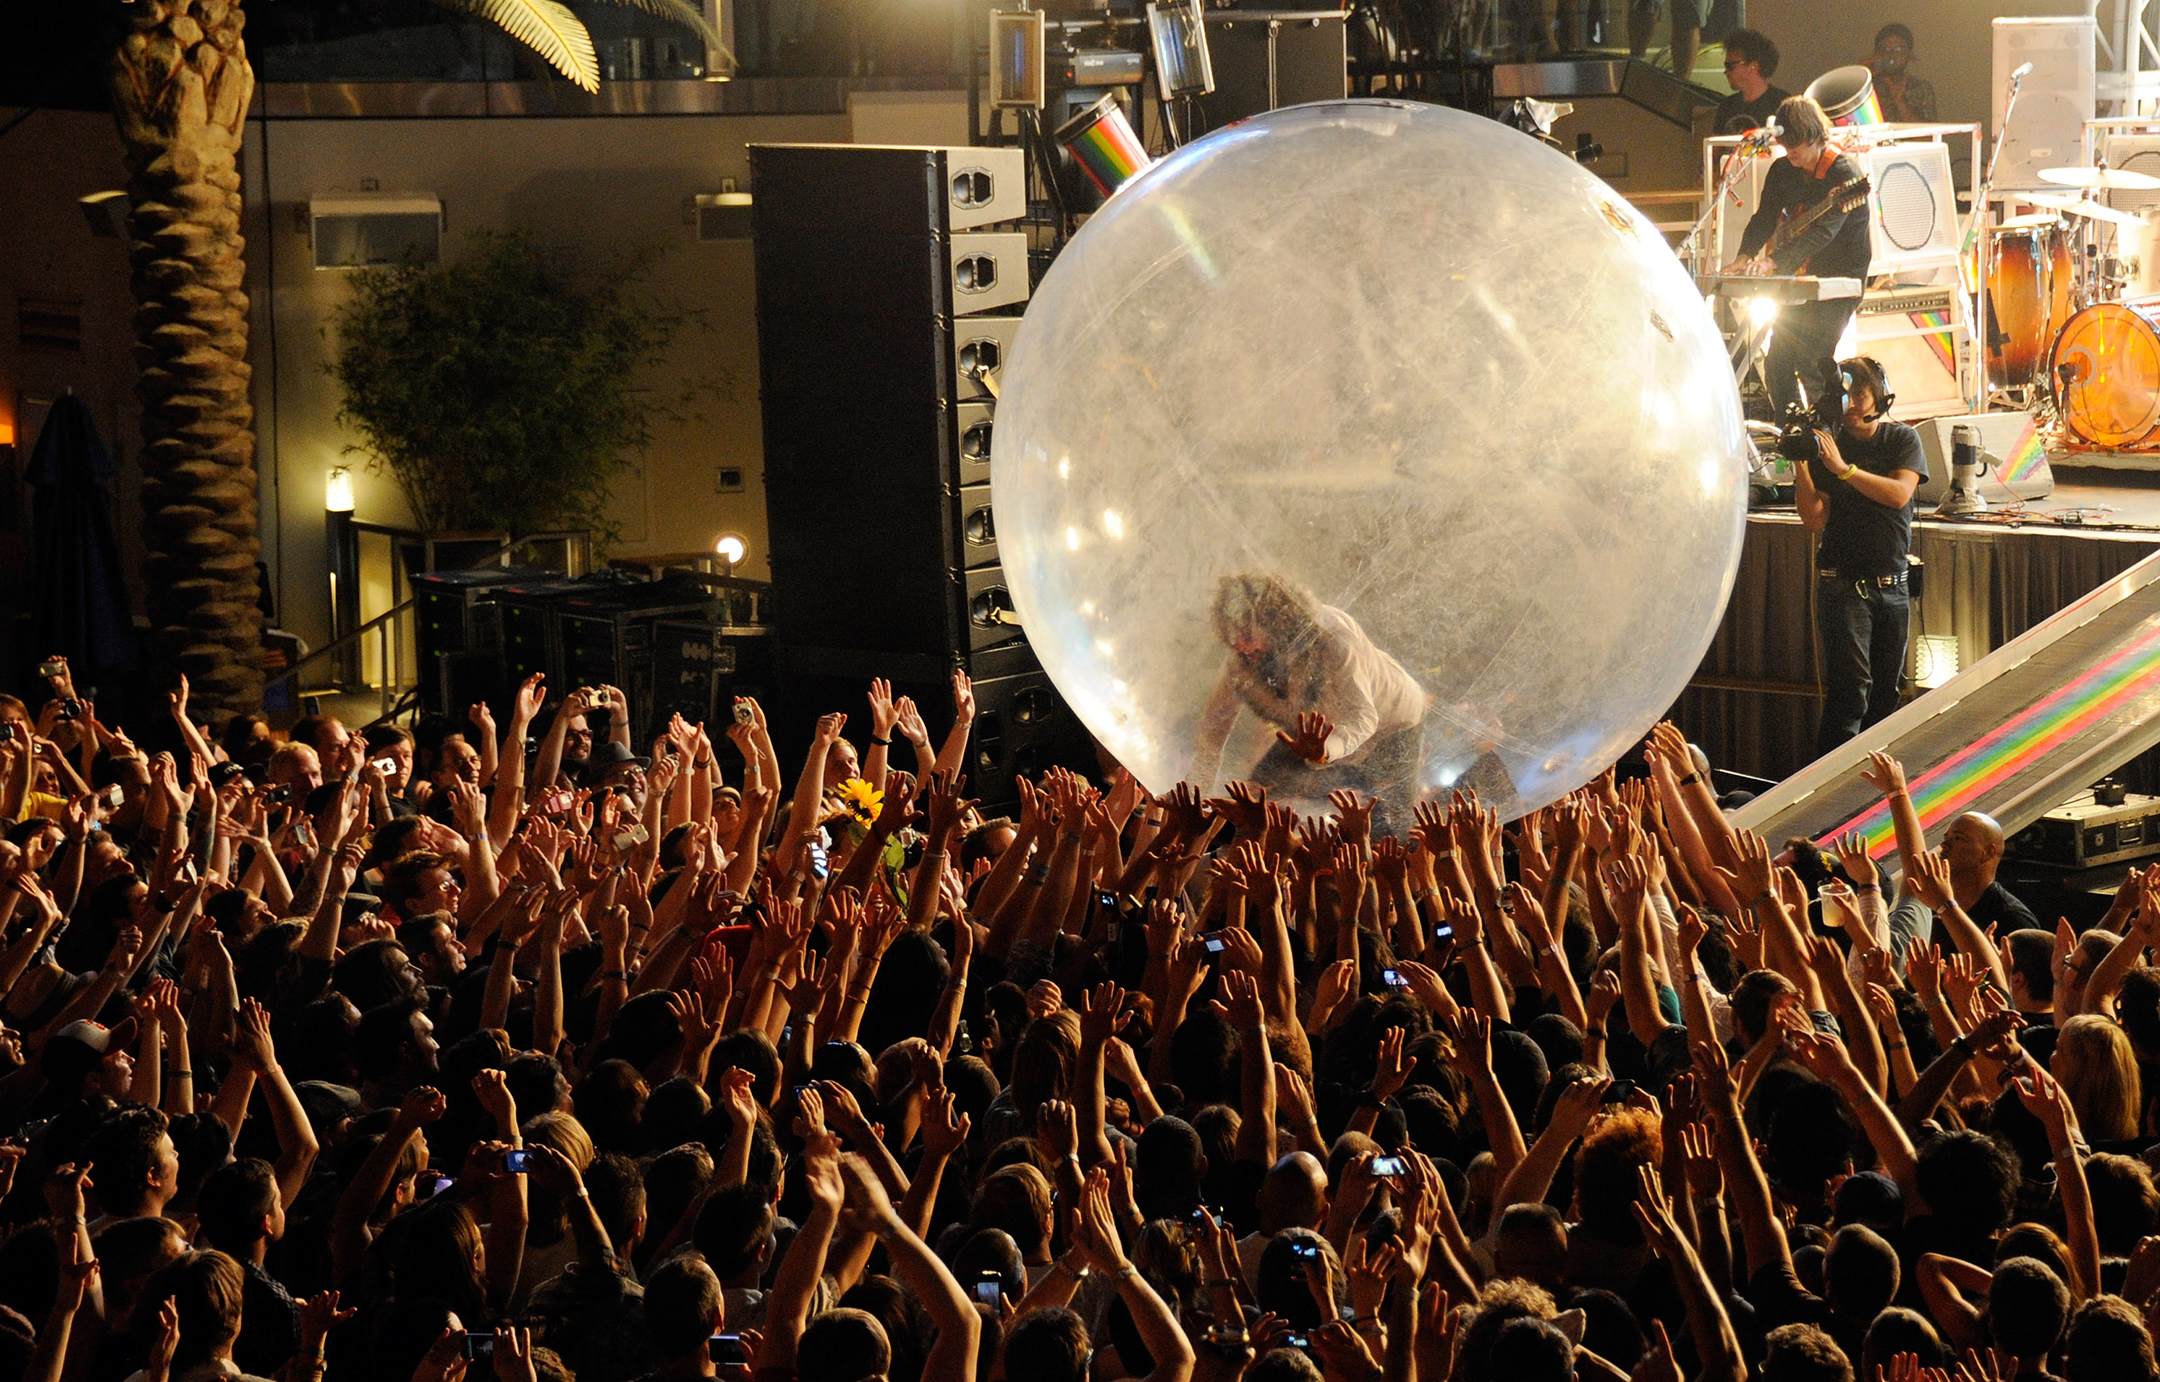 Photograph from a Flaming Lips concert showing lead singer Wayne Coyne in a bubble held aloft by the crowd of fans.